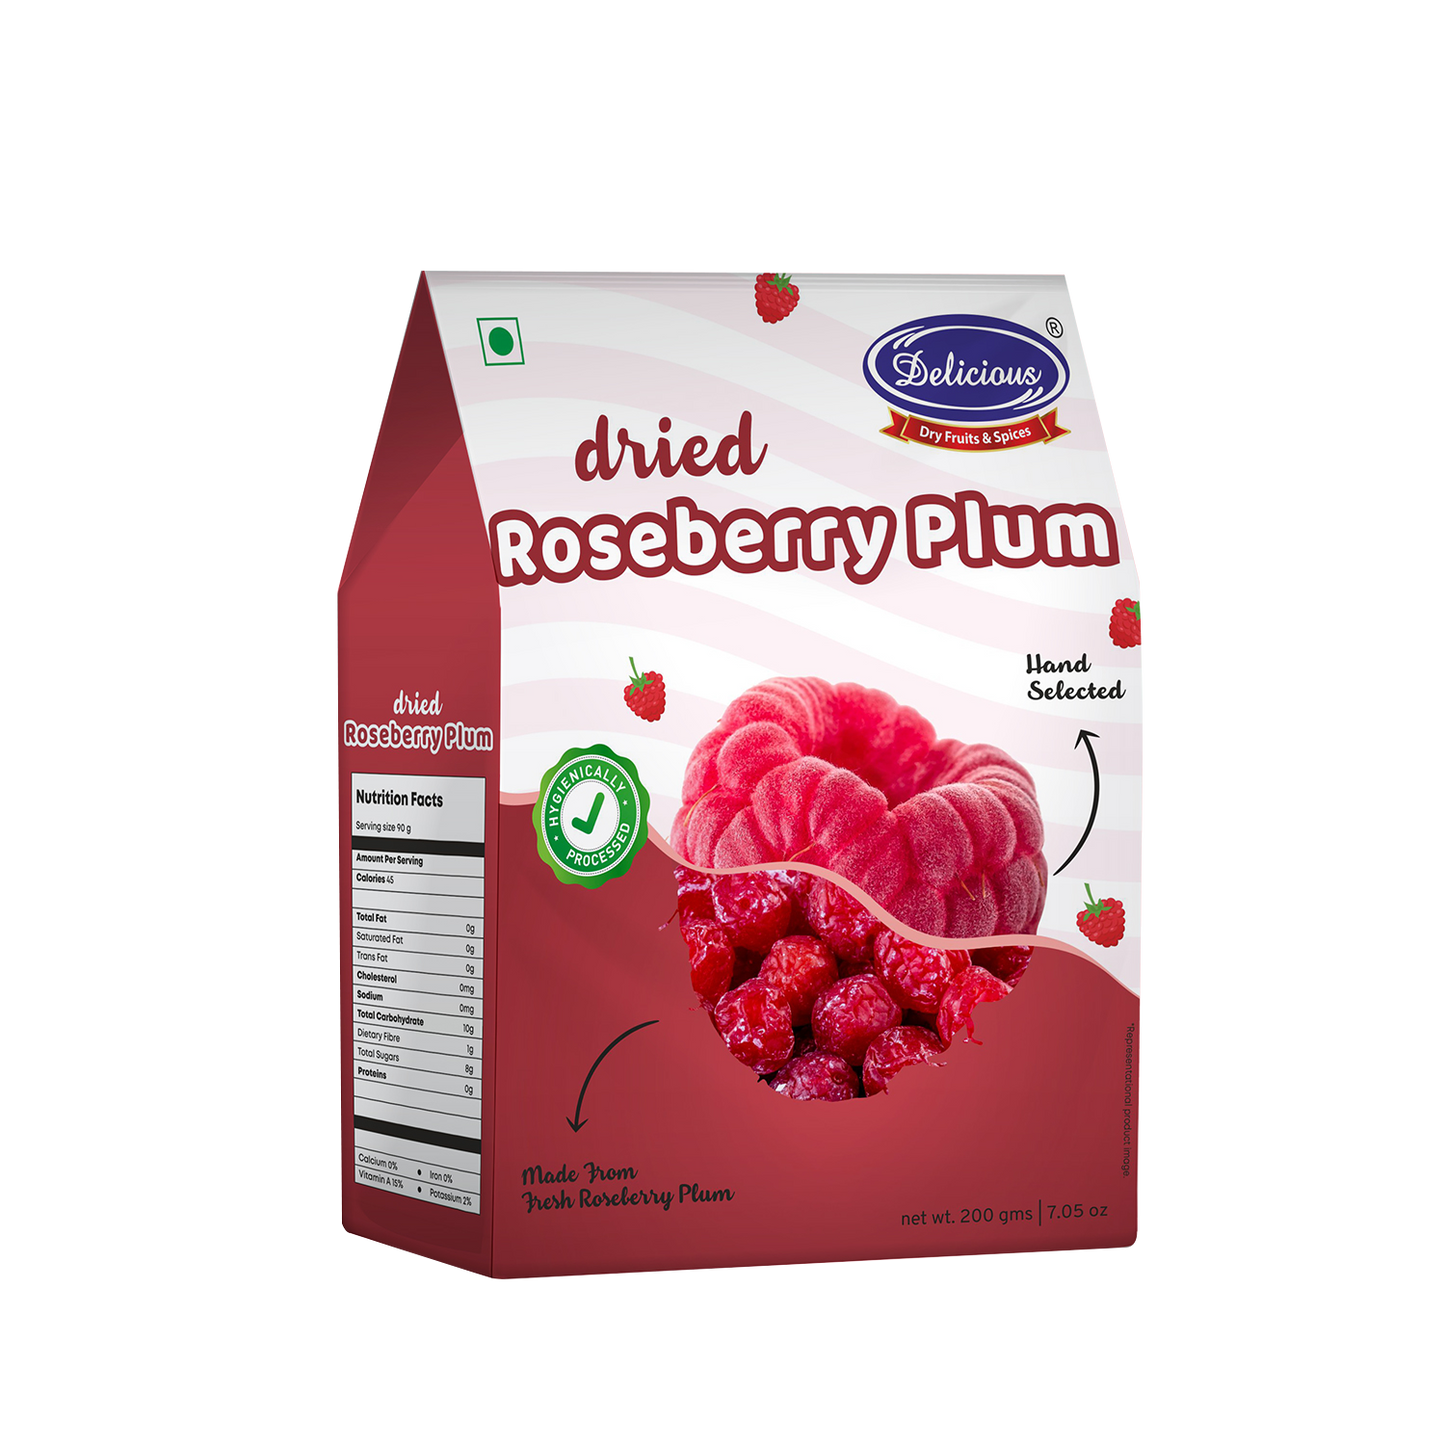 Delicious Dried Roseberry Plum